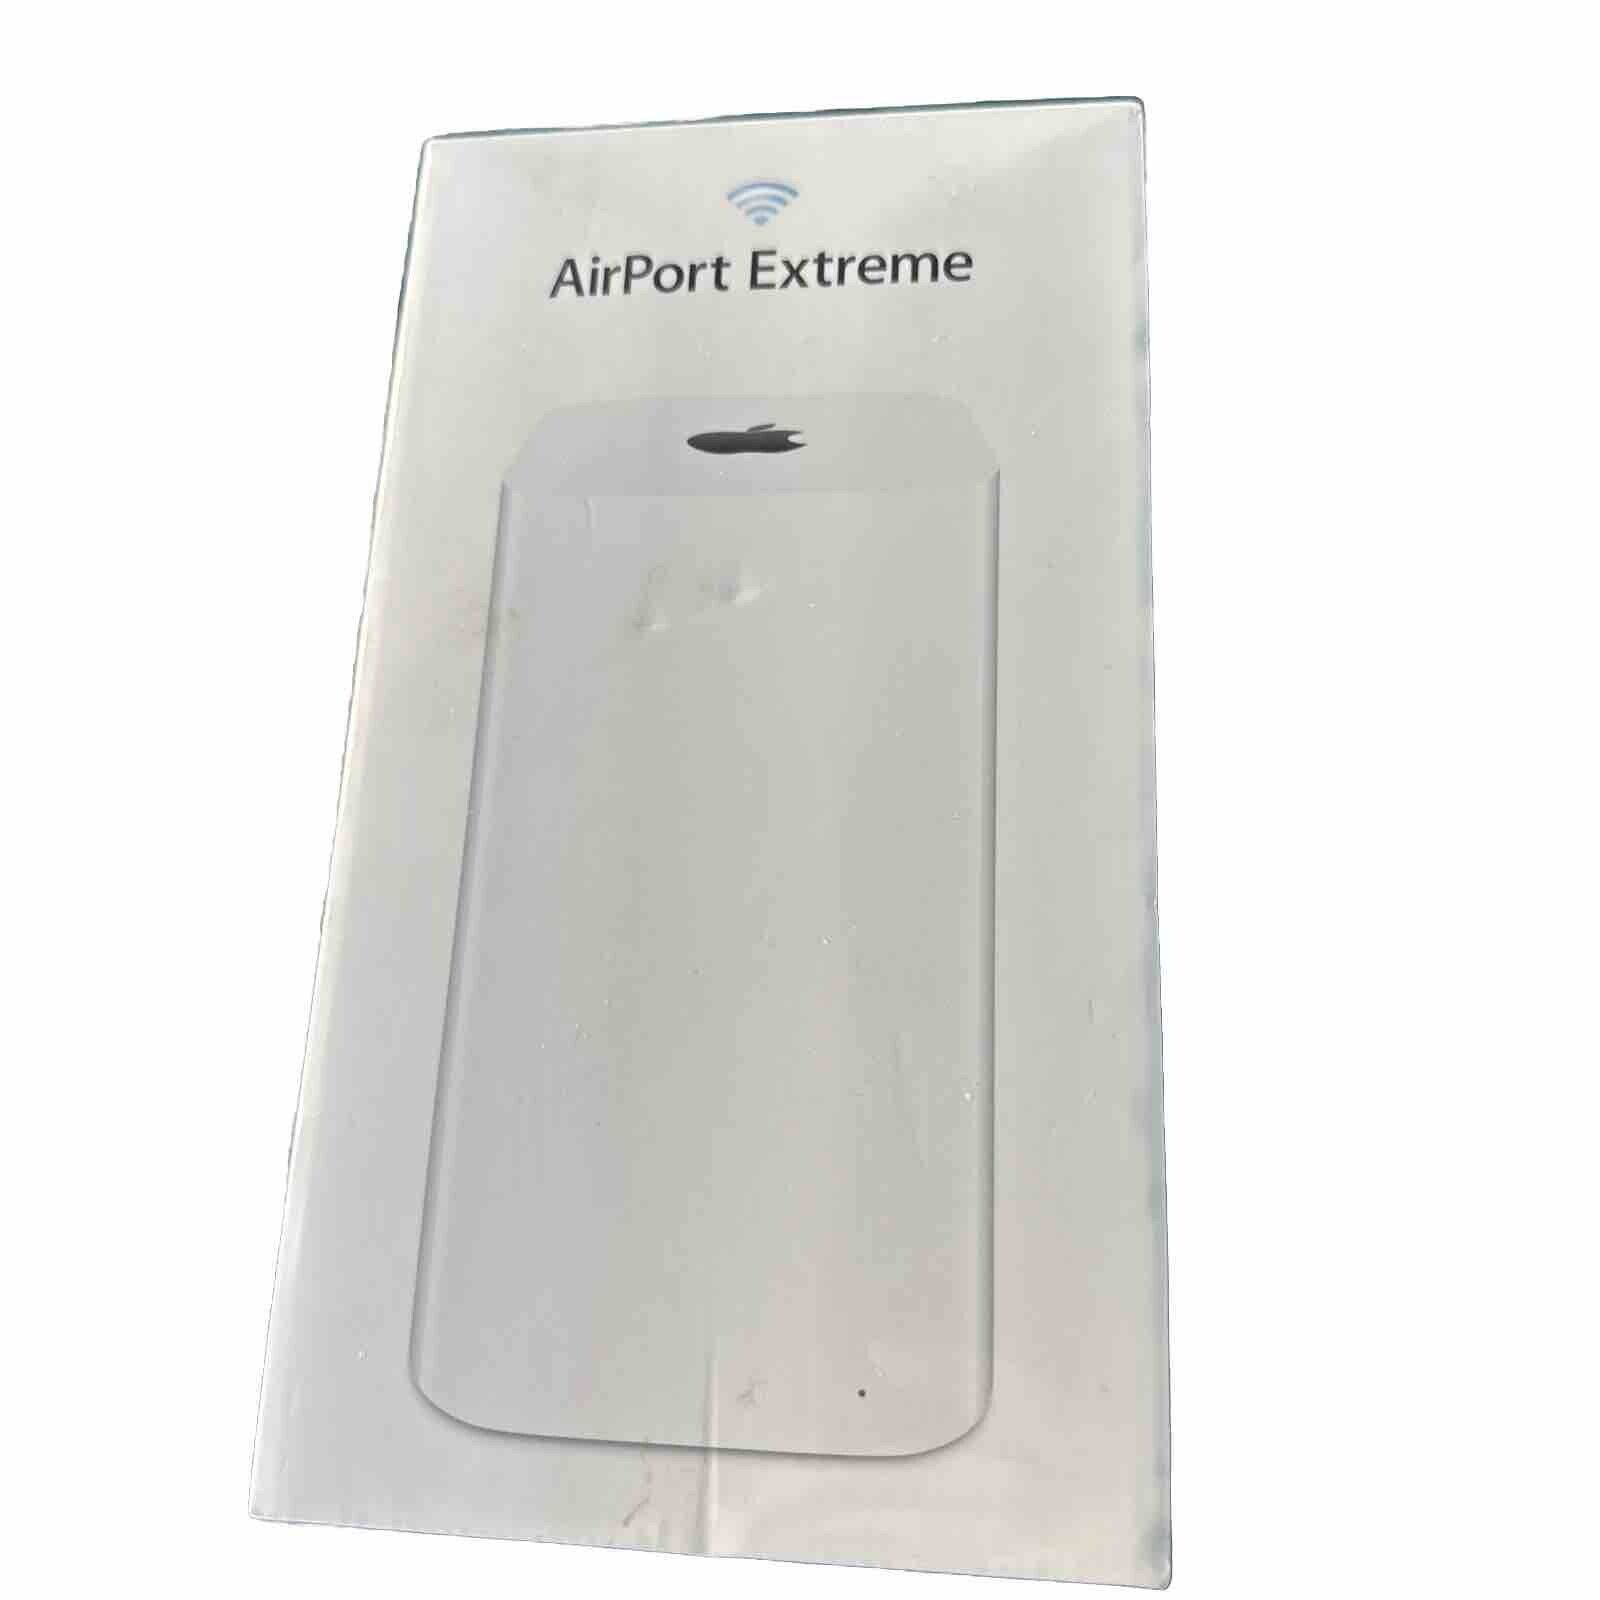 Apple AirPort Extreme 802.11ac WiFi Router A1521 ME918LL/A - Brand New Sealed